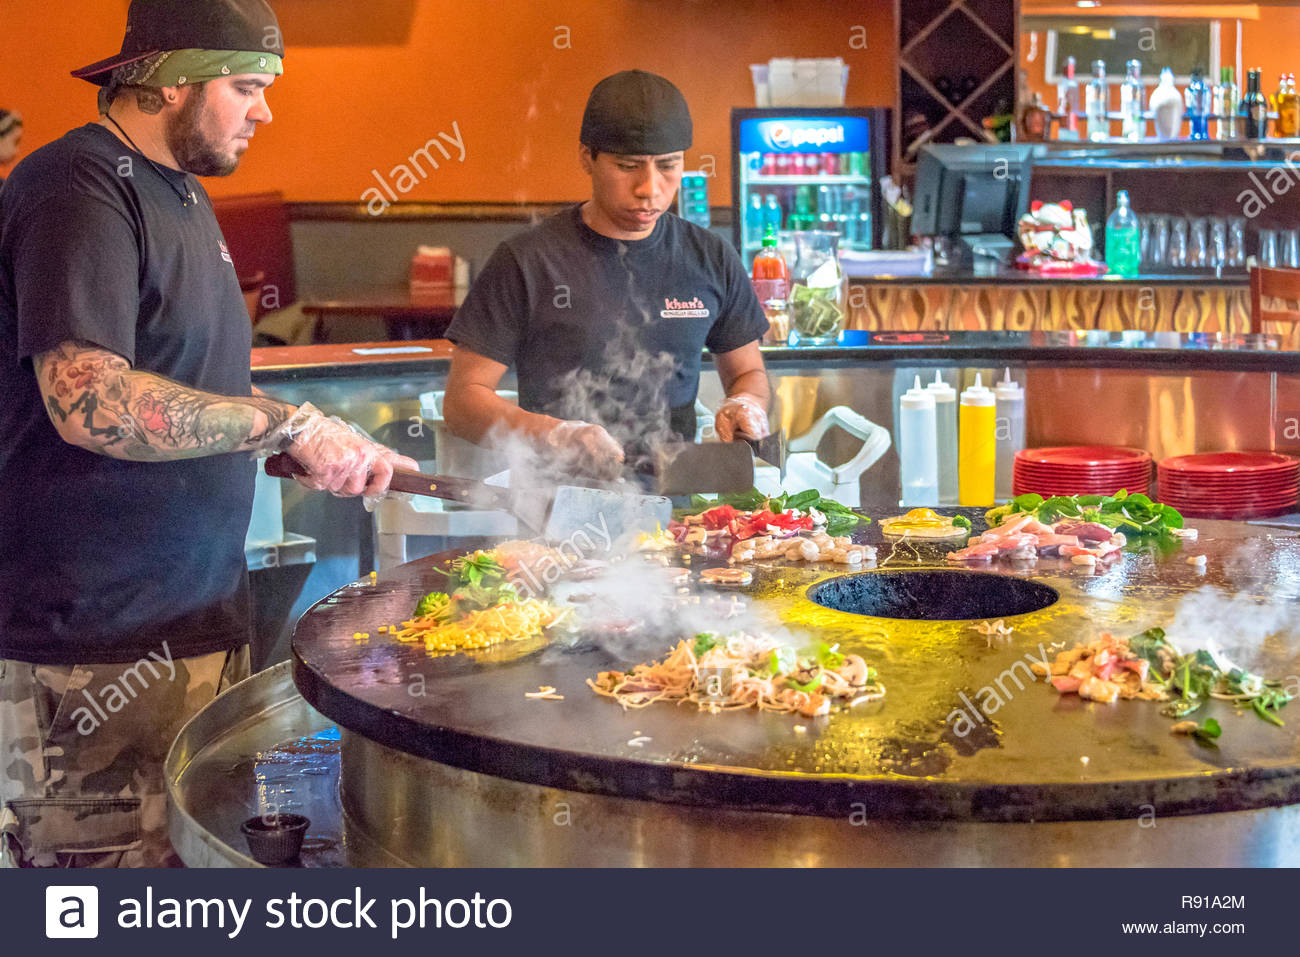 Mongolian Buffet Restaurant Kitchen Scenes In New York City Men Cutting Vegetables On A Large Circular Hot Pan At A Restaurant In Nyc Stock Photo Alamy